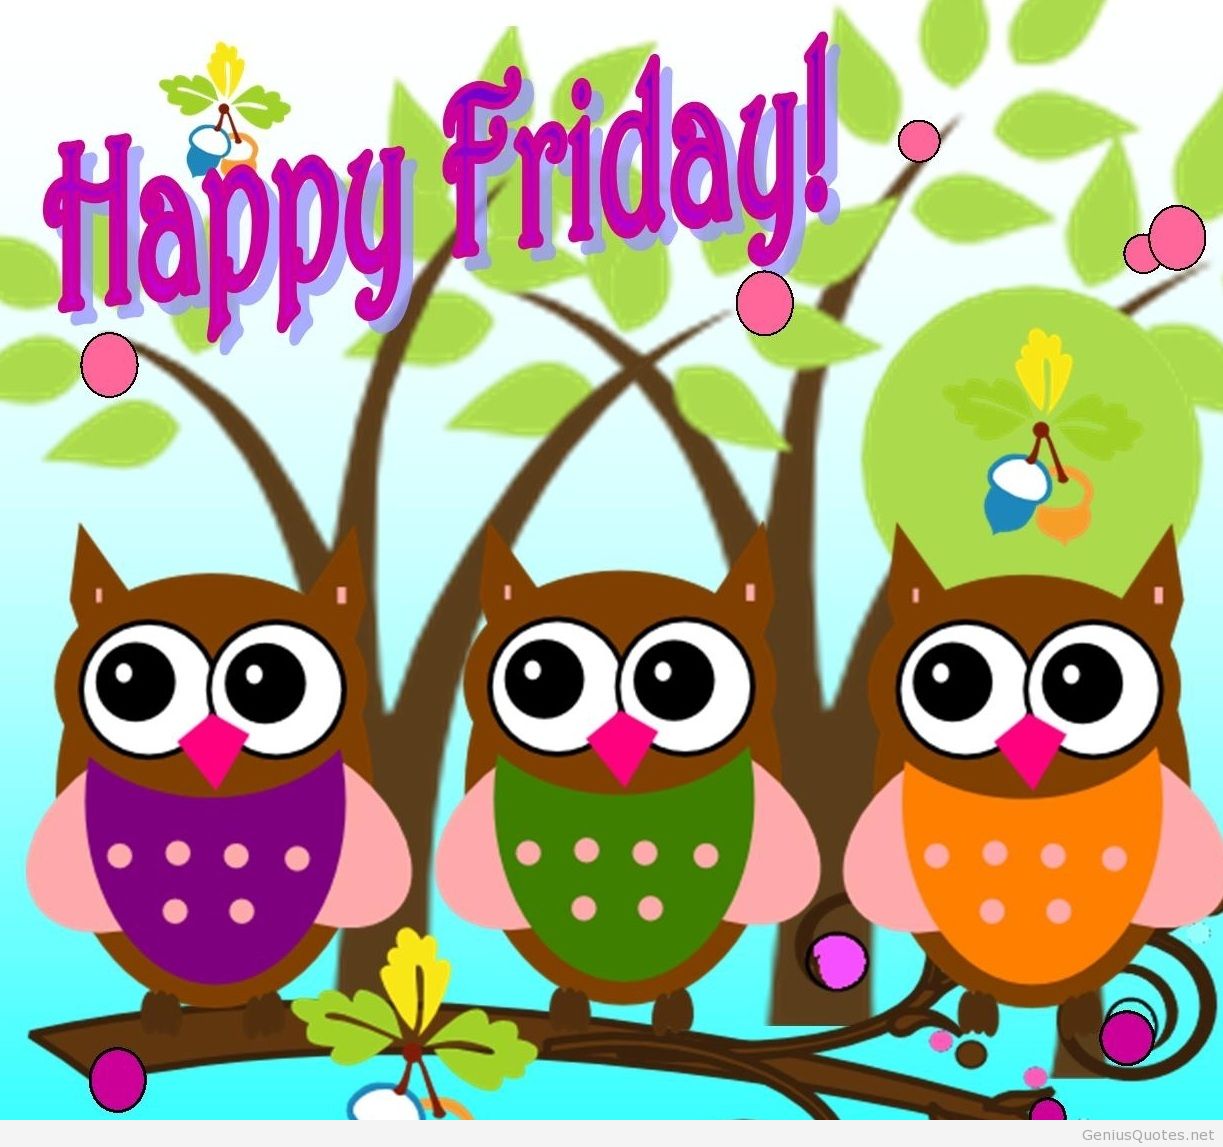 Happy Friday Cartoon Image Png Clipart